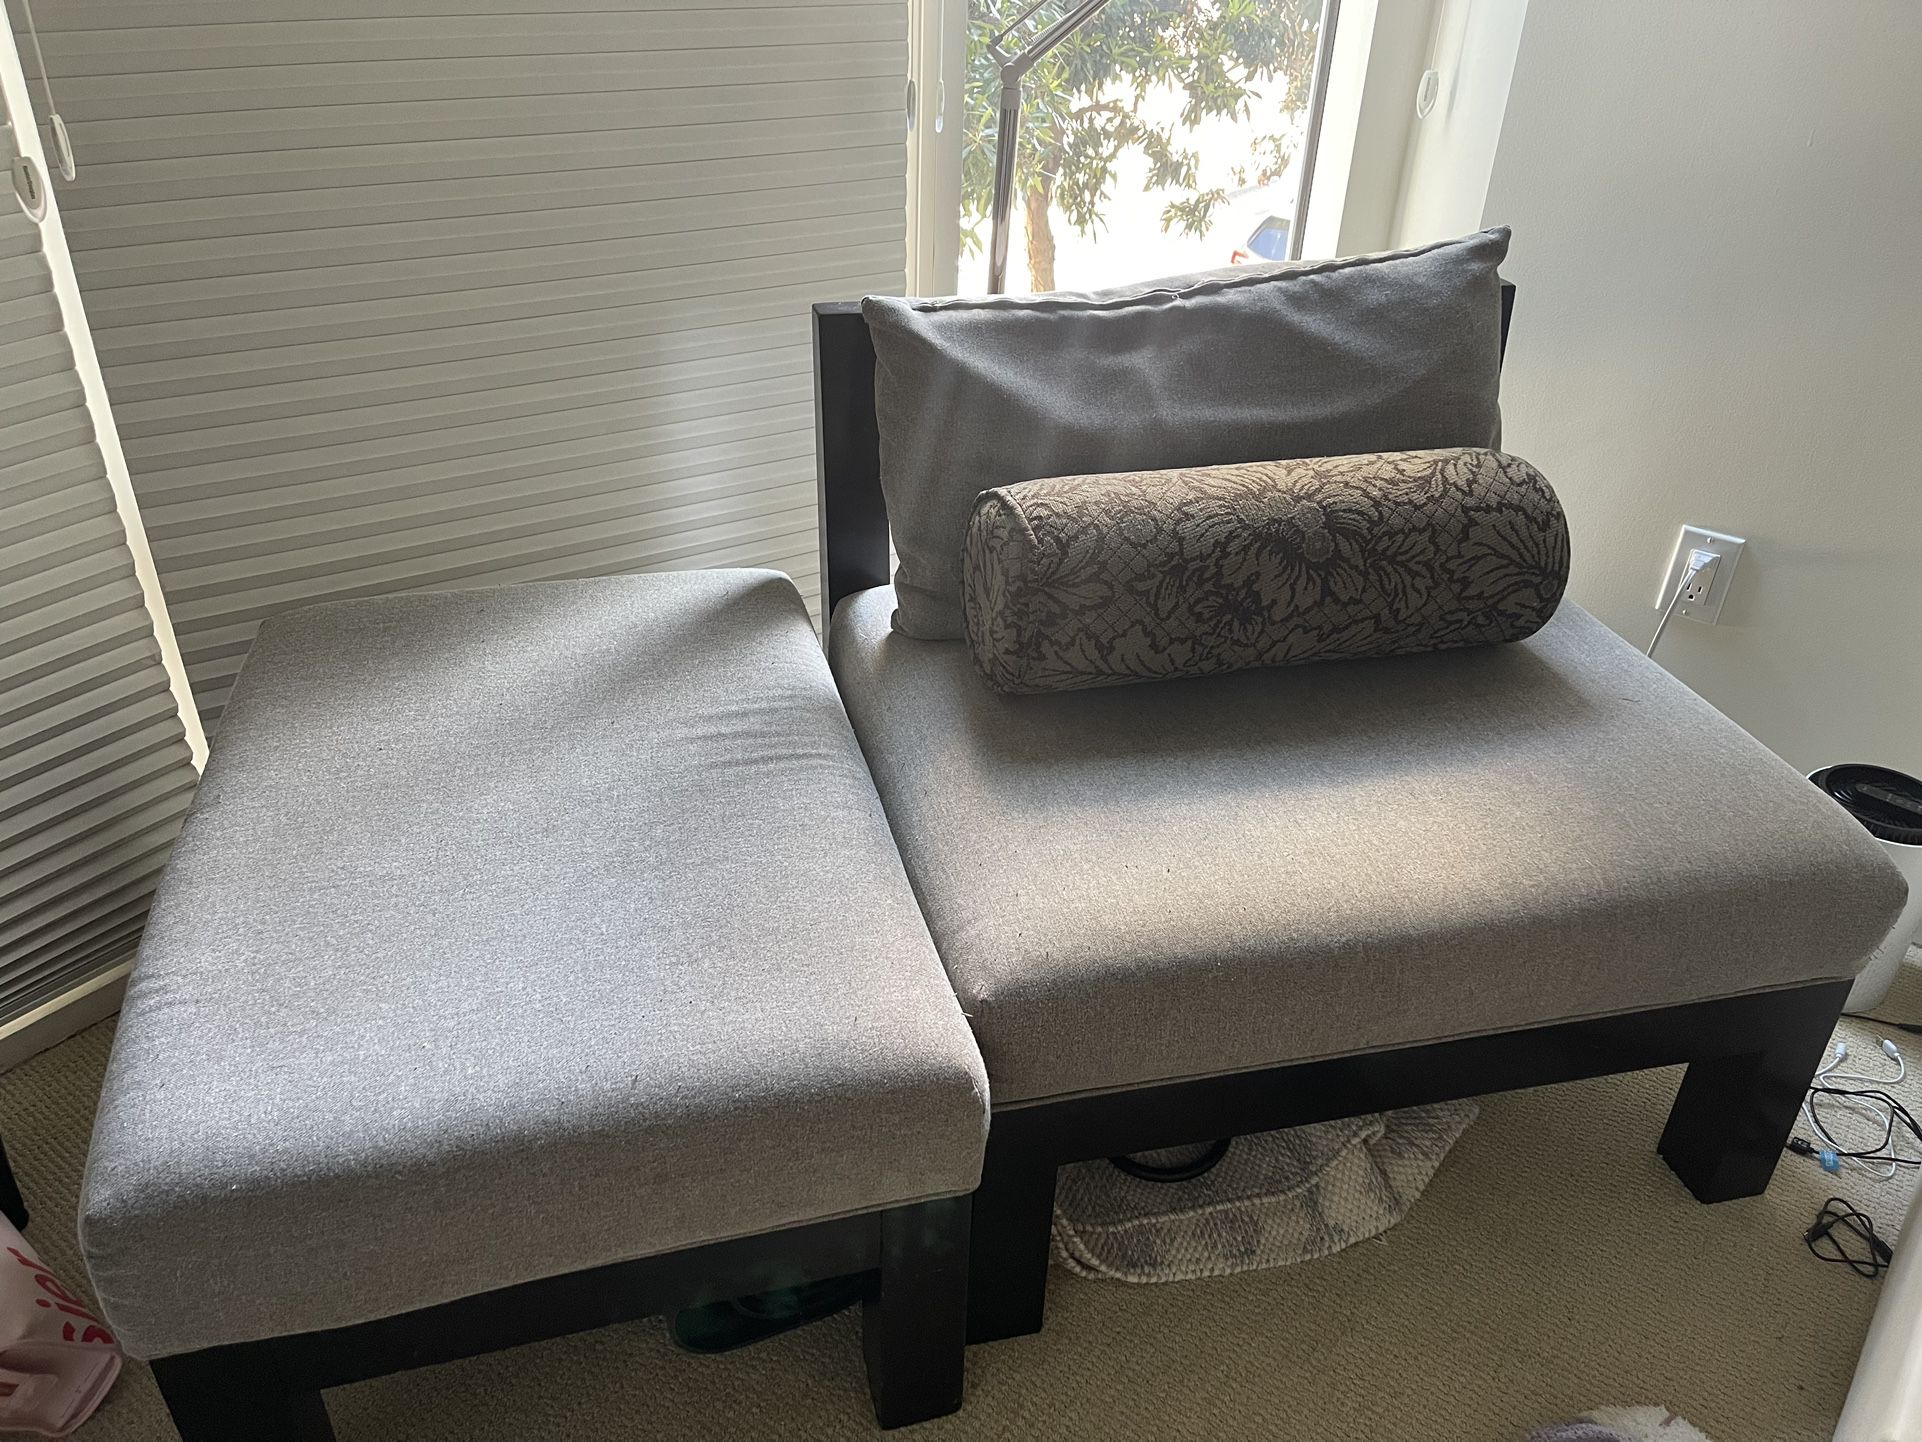 Cushioned Grey Chair With Foot Rest And Pillows